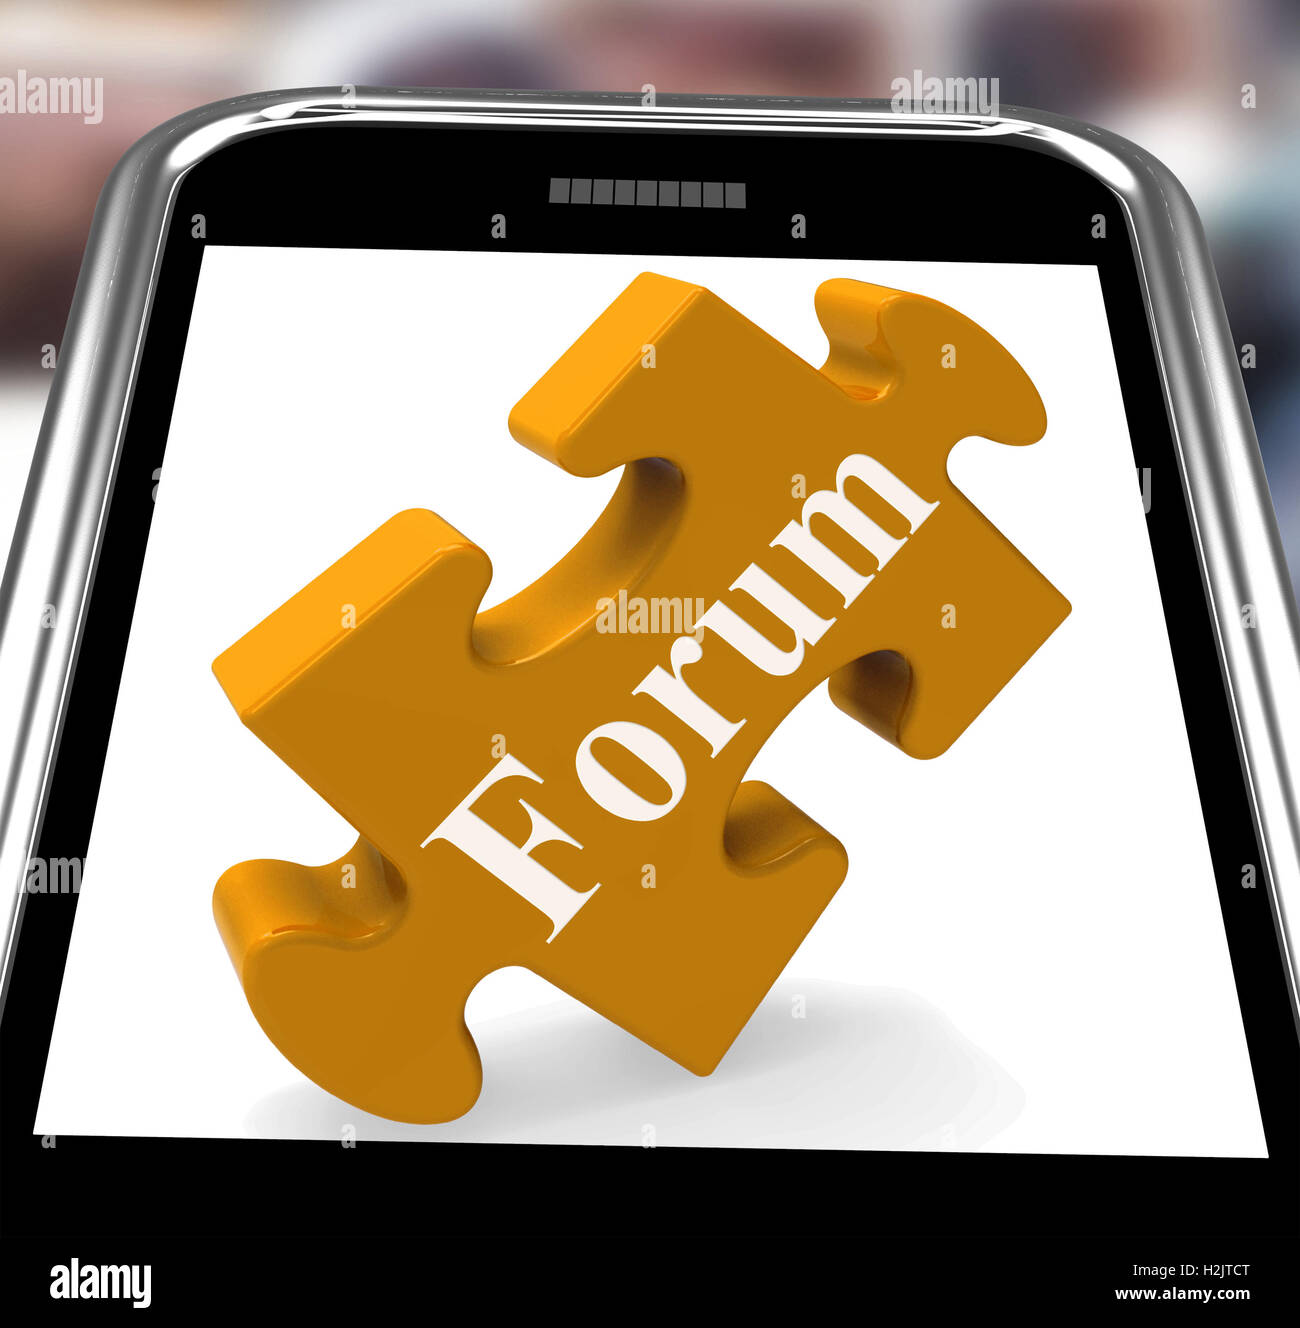 Forum Smartphone Shows Internet Discussion And Exchanging Ideas Stock Photo